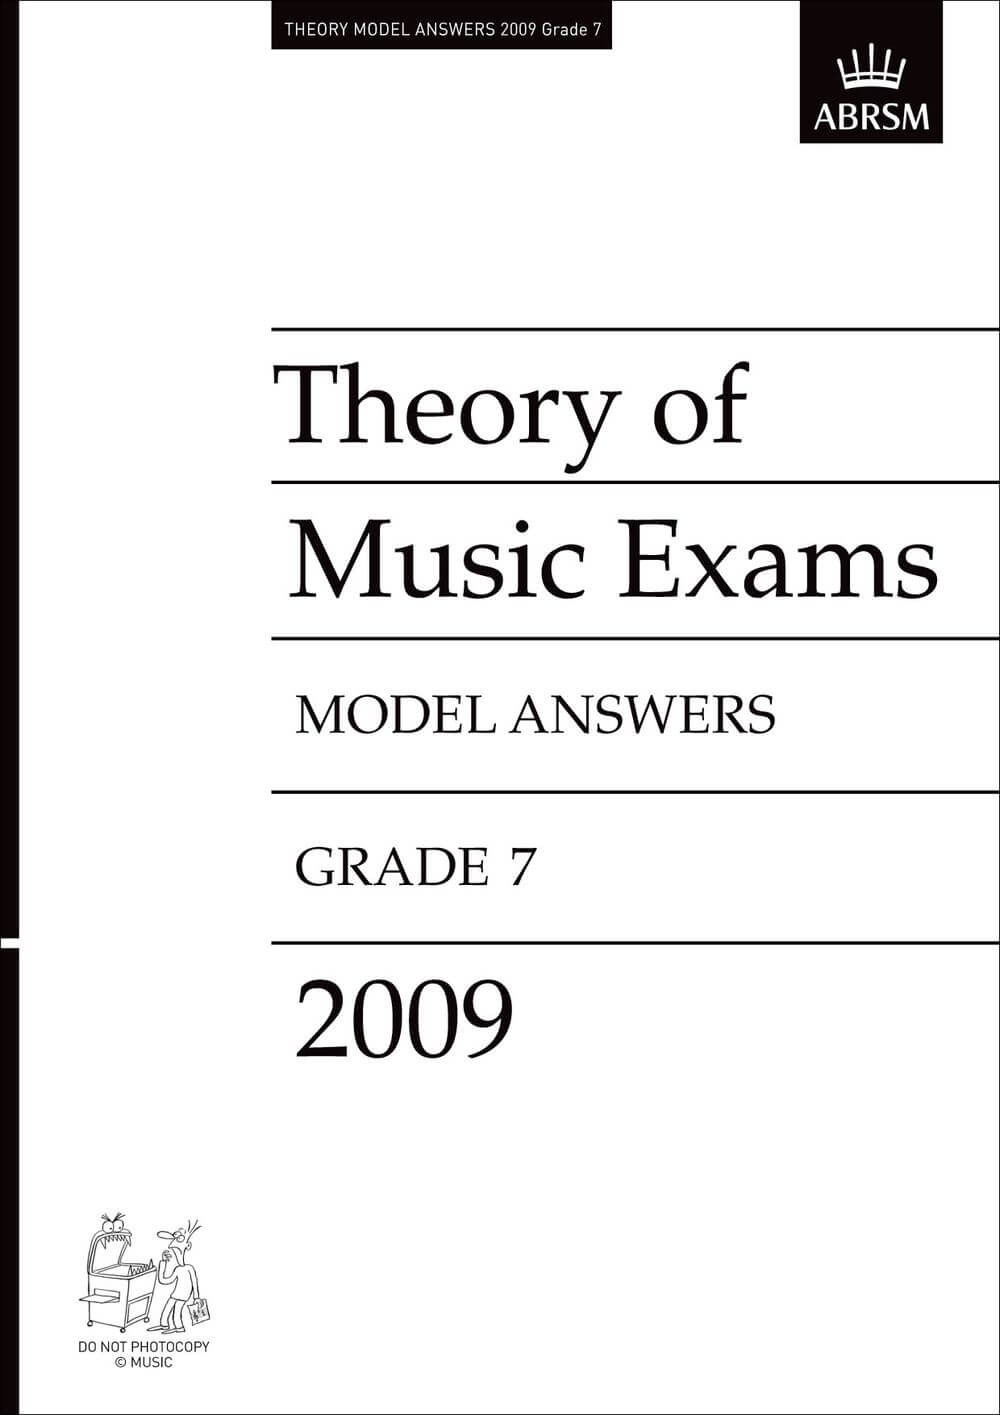 Theory of Music Exams Model Answers